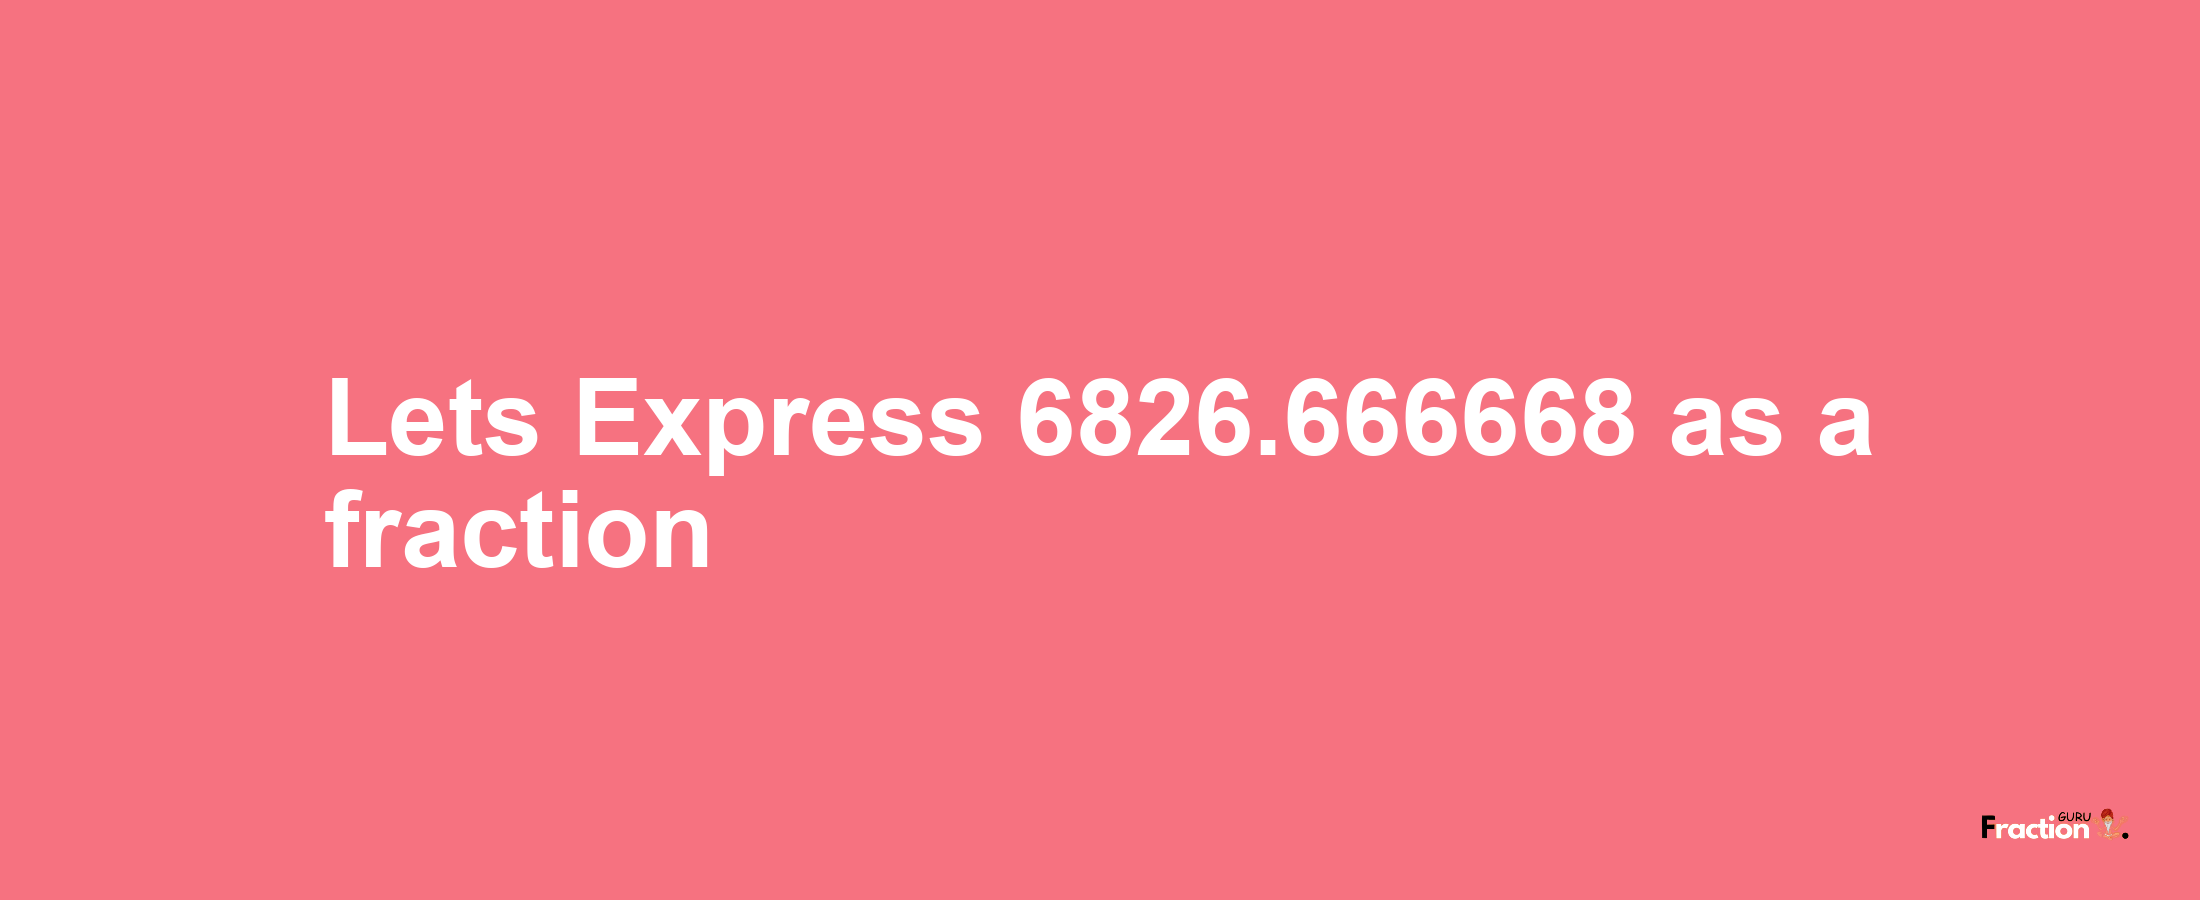 Lets Express 6826.666668 as afraction